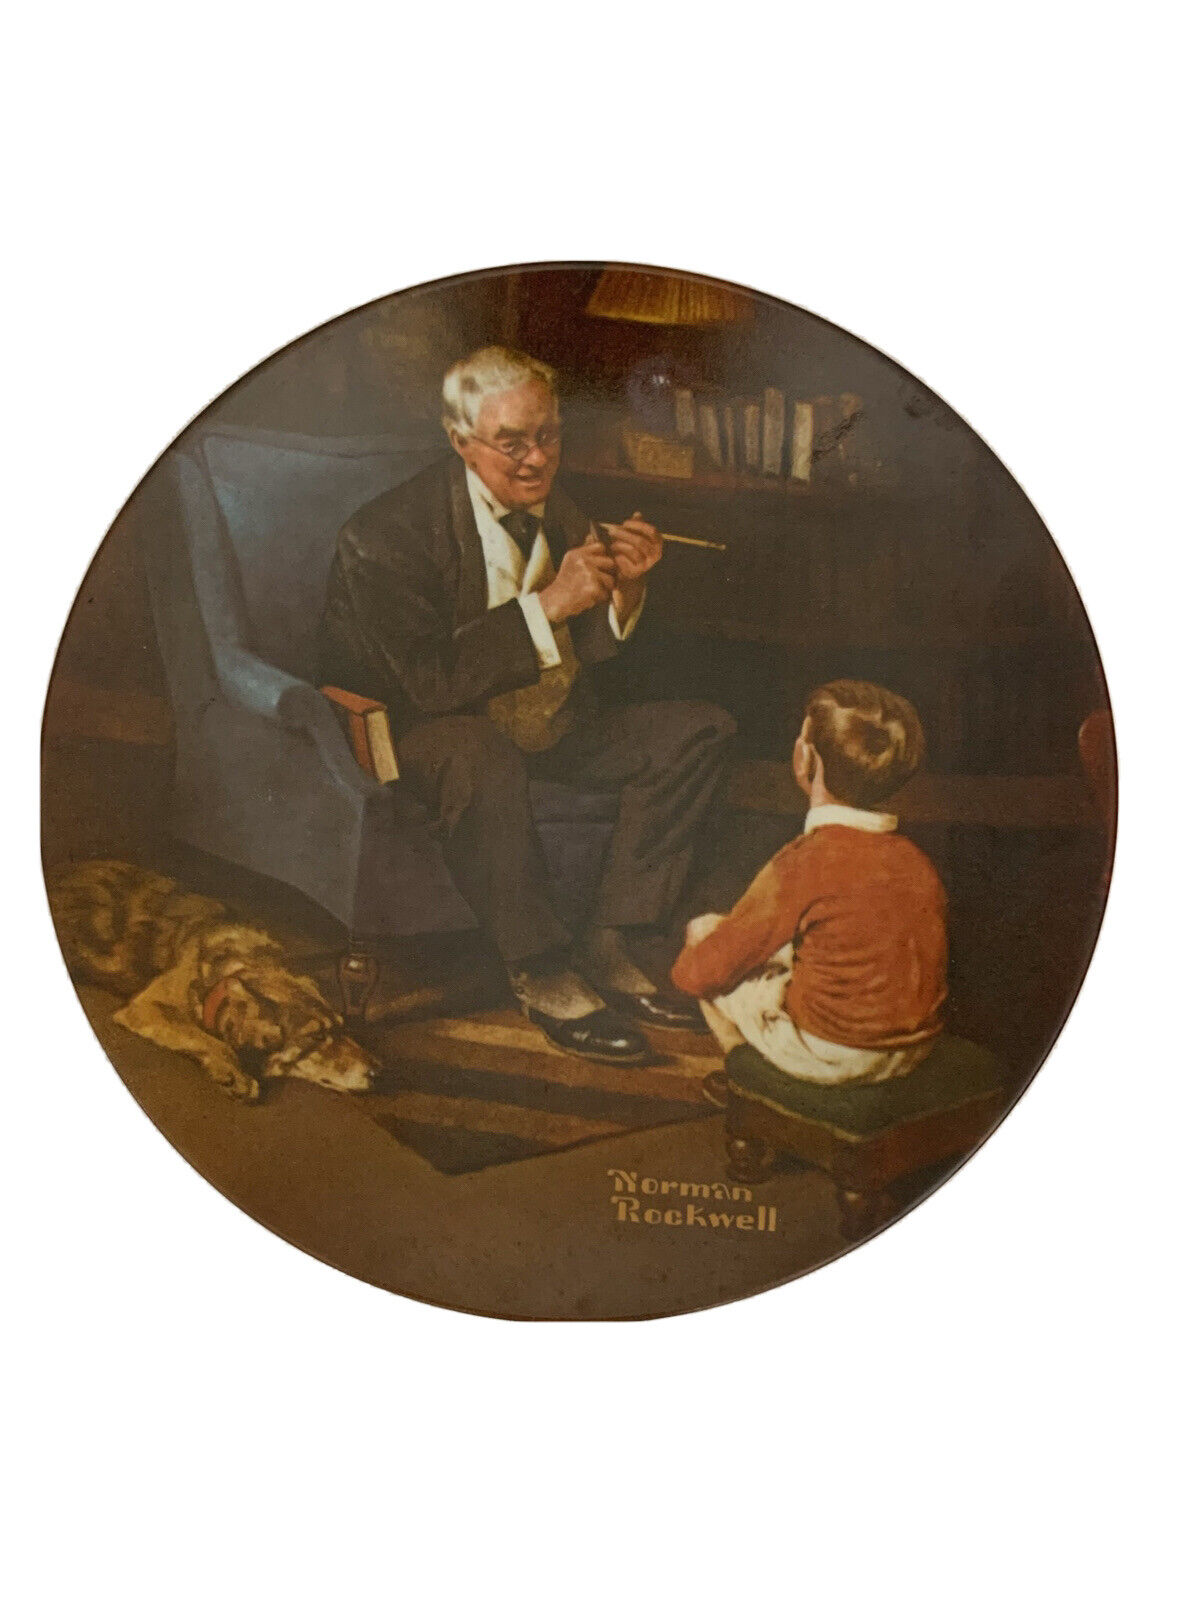 NORMAN ROCKWELL Ltd. Edition Collectors Plate “The Tycoon” #19011 Vtg 1982 USA